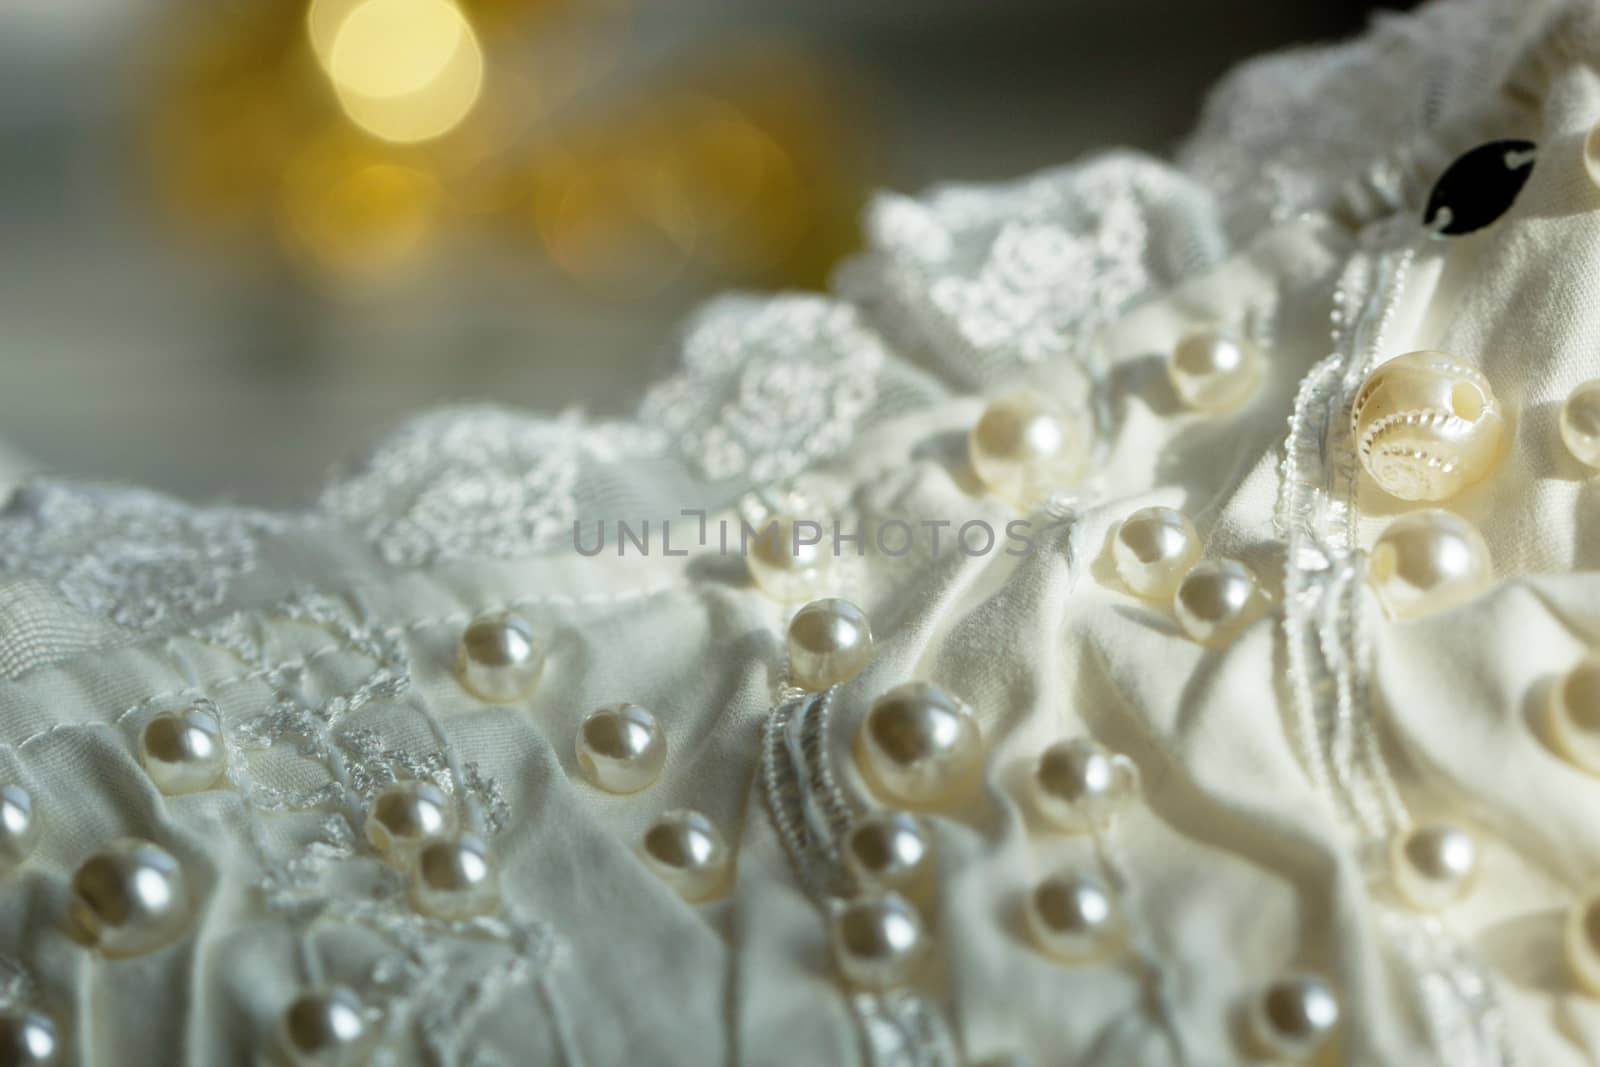 textile wedding background with beads. Tiny pearls embroidered over a wedding dress